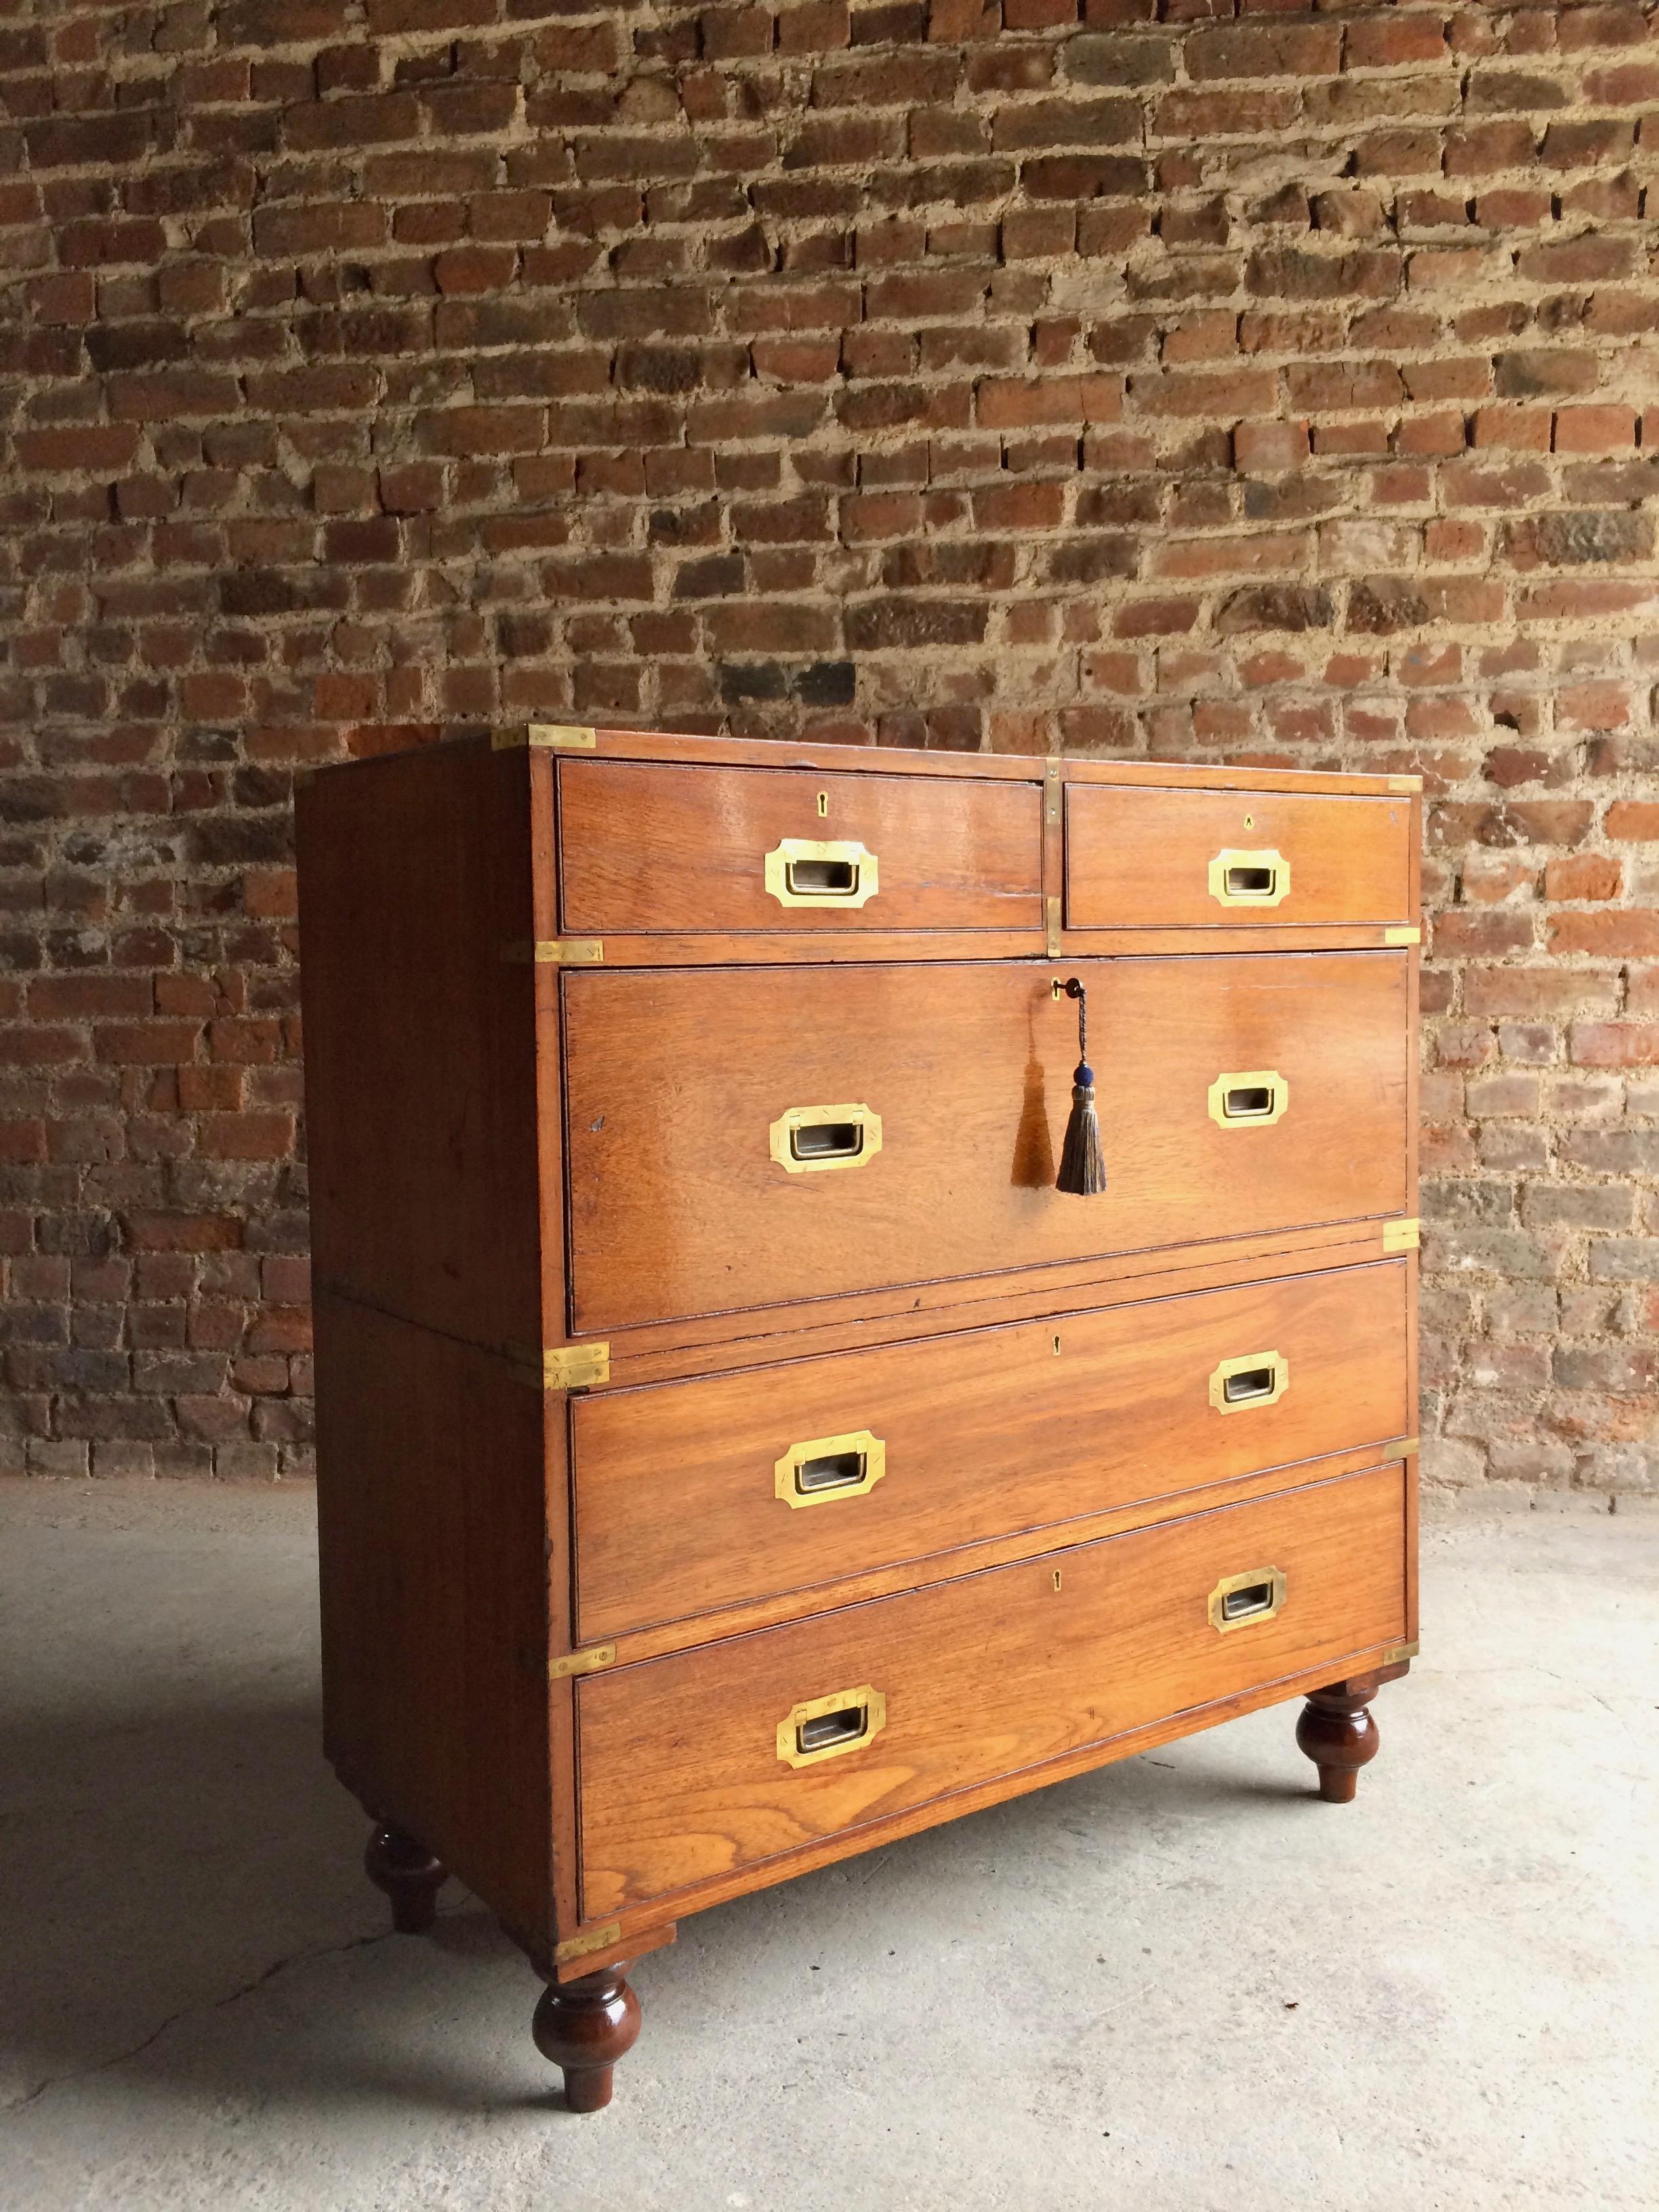 Fabulous antique Campaign chest of drawers mahogany circa 1875 Victorian No.5

Fabulous fully restored 19th century Victorian mahogany brass-mounted campaign chest of drawers circa 1875, the rectangular top complete with brass corner protectors